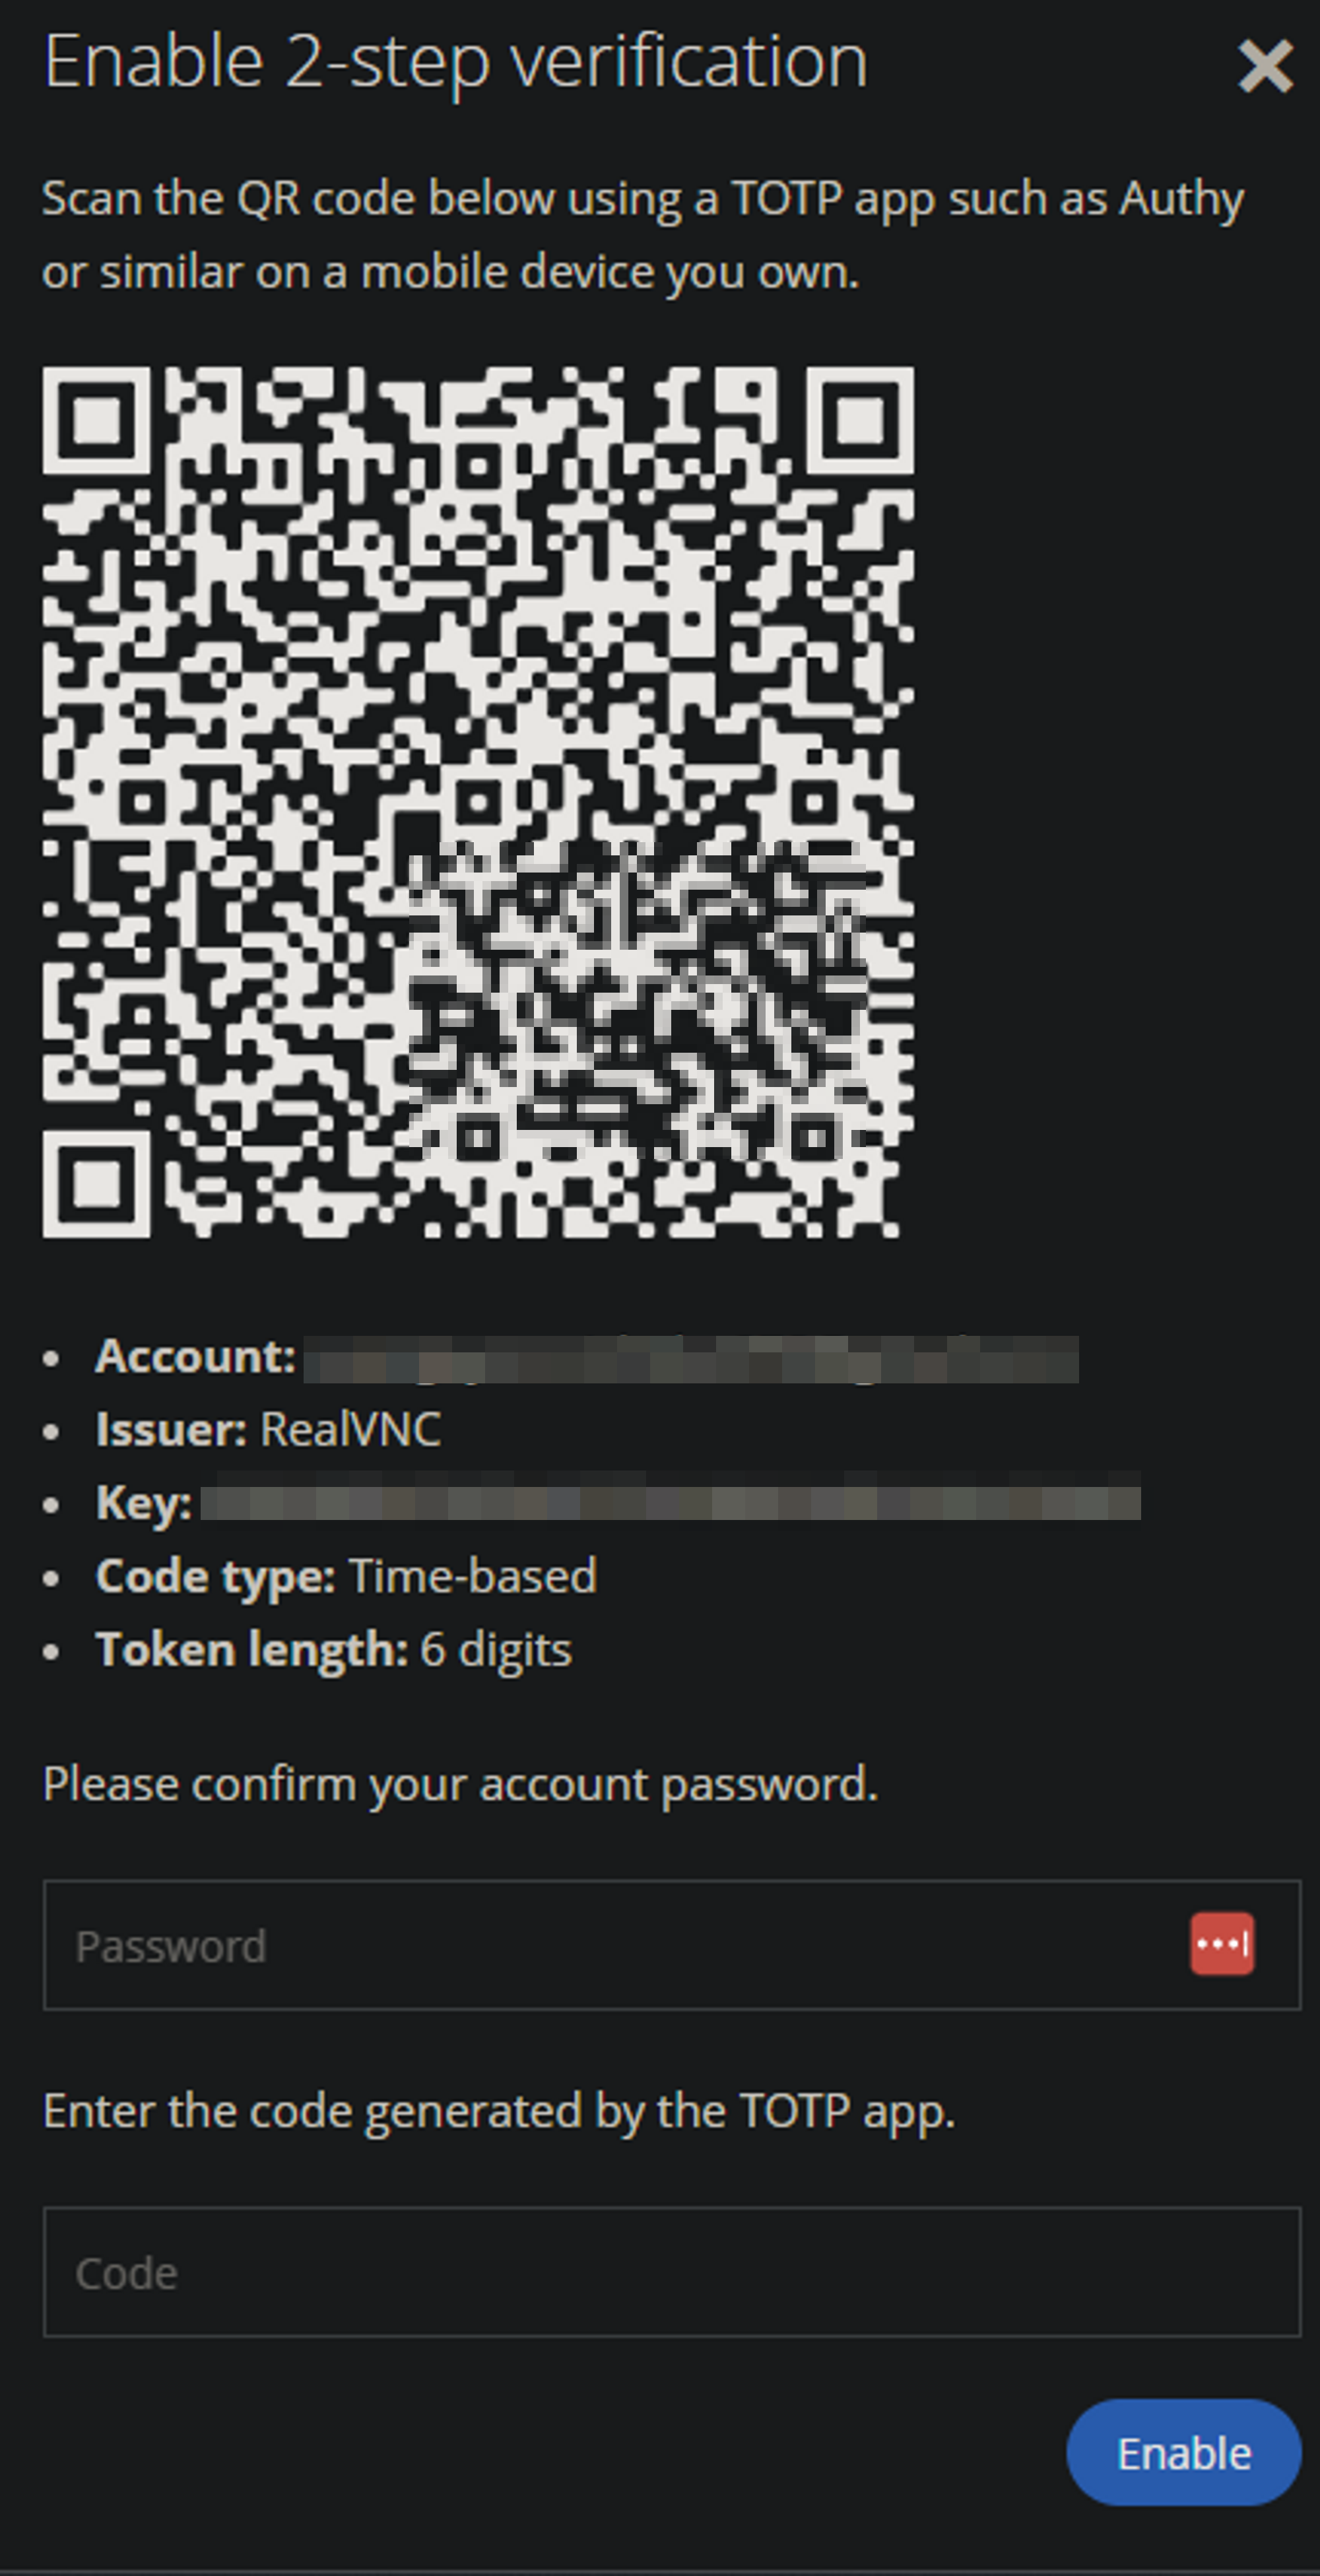 Viewing the QR code specific to a RealVNC account